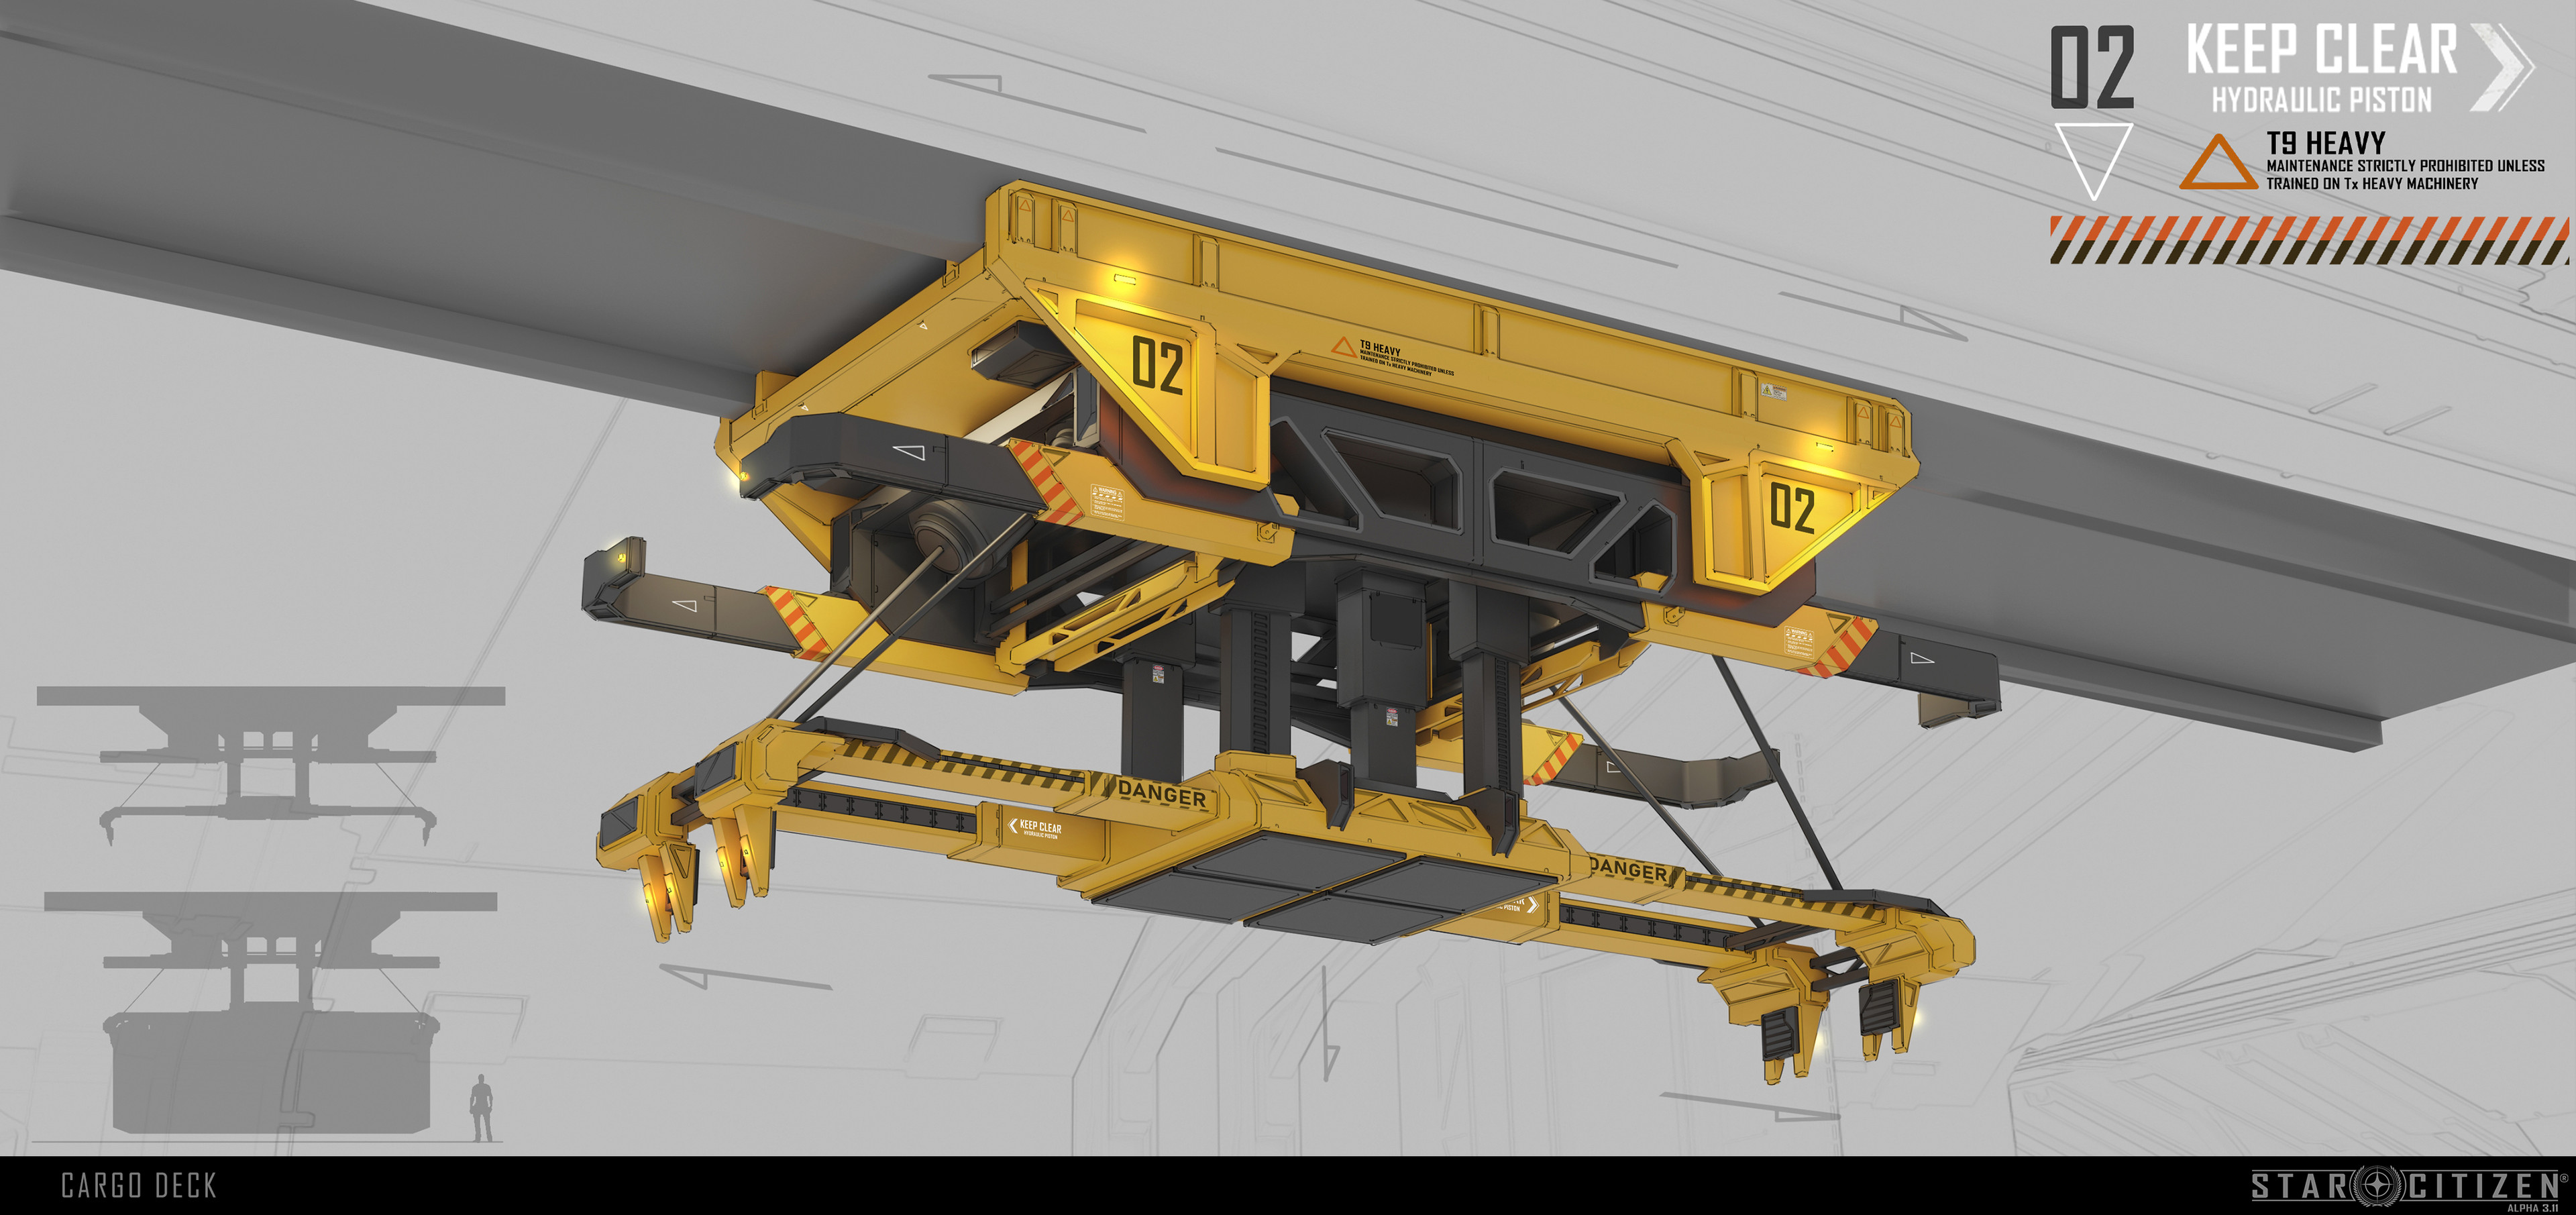 The cargo crane was based on an original concept by Sheng Lam